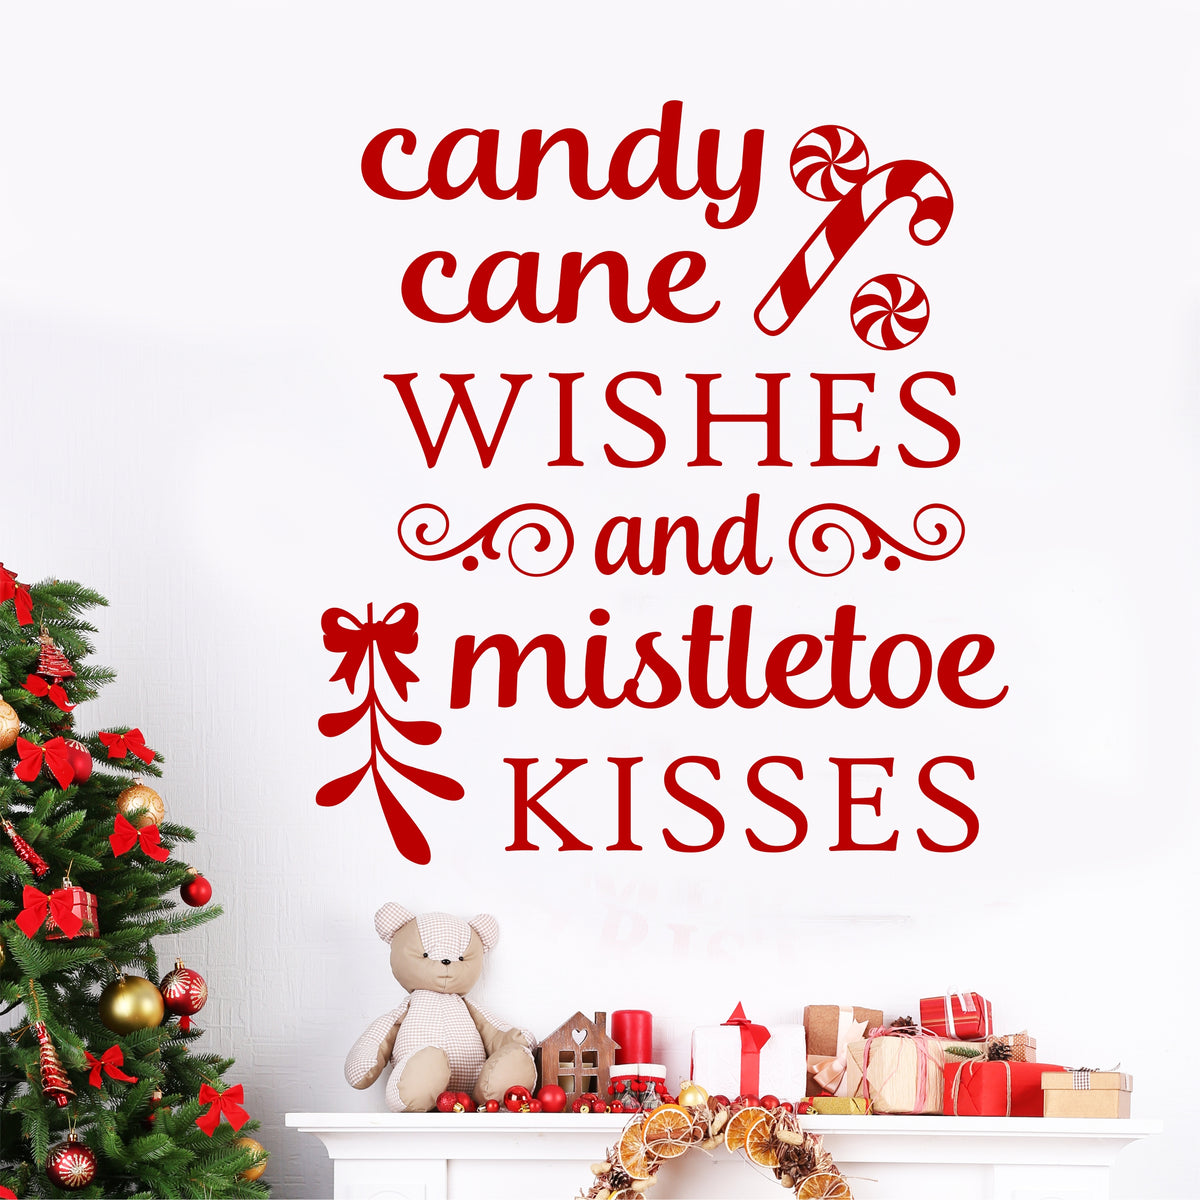 Christmas Wall Decal Candy Cane Wishes Mistletoe Kisses ...